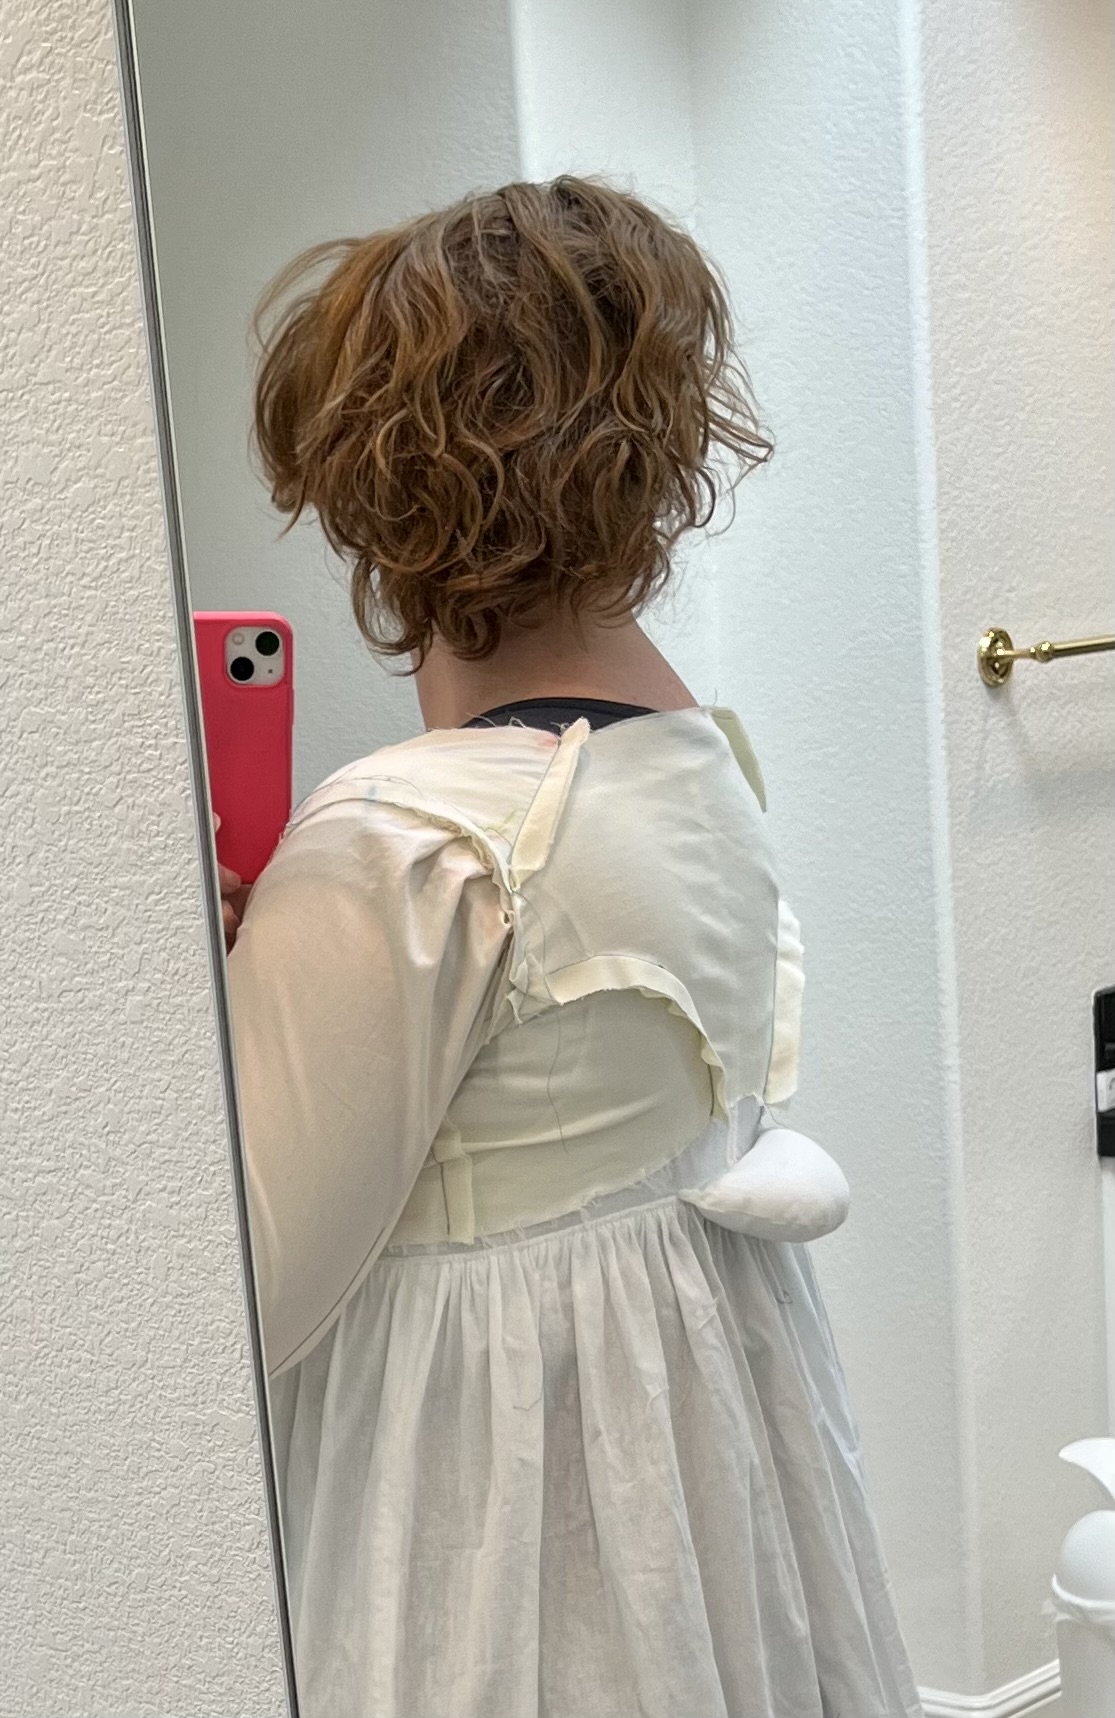 A woman faces away from the camera. She is wearing a white petticoat with a small bum roll and a white 1790s bodice mockup